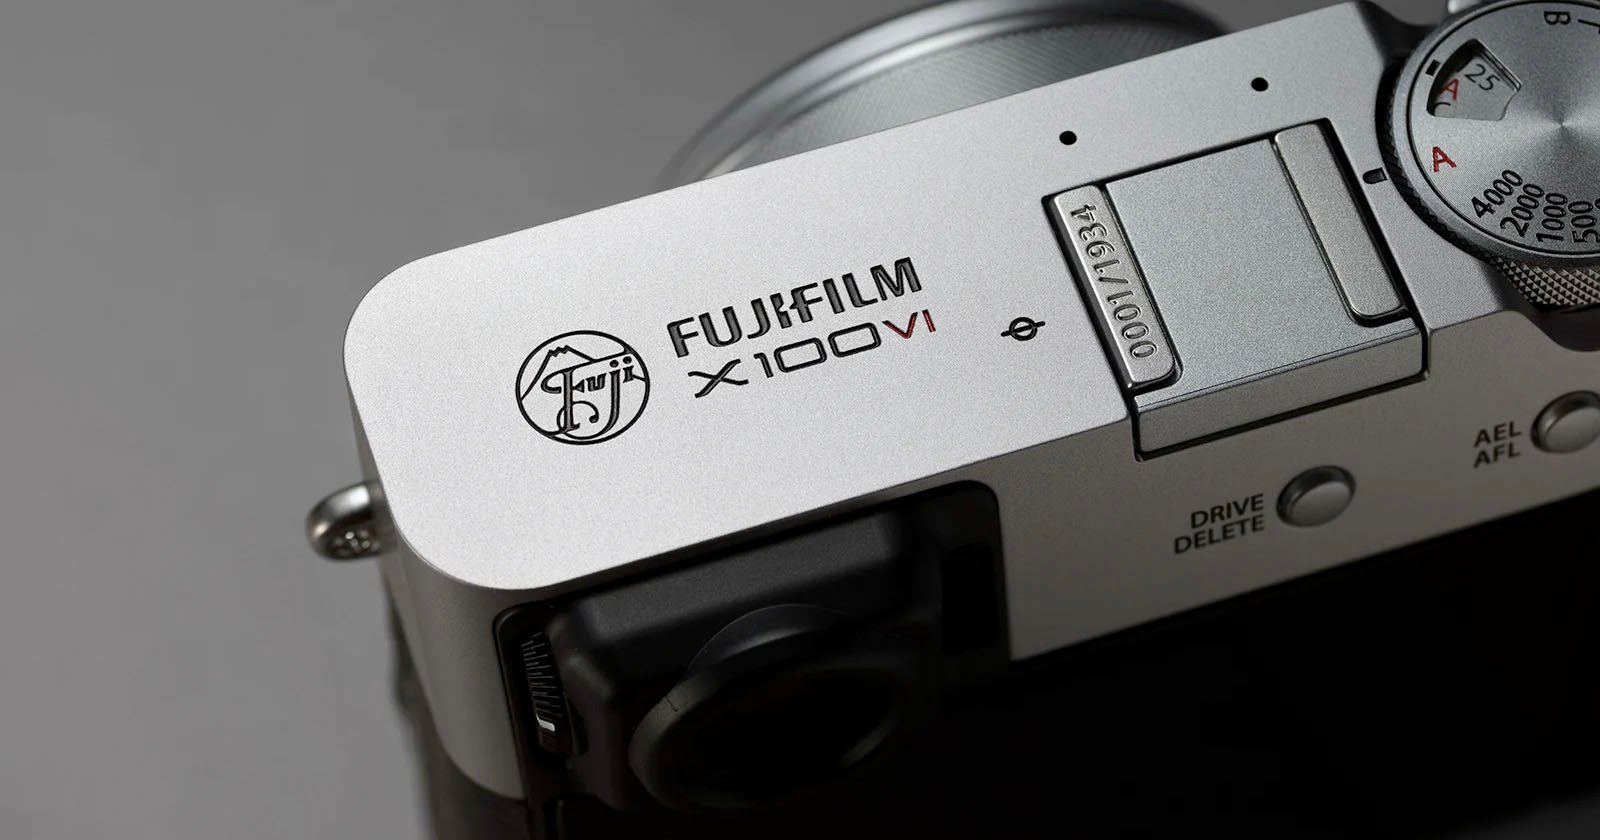 Fujifilms Online Store Buckles Under Surge to Buy Limited Edition X100VI